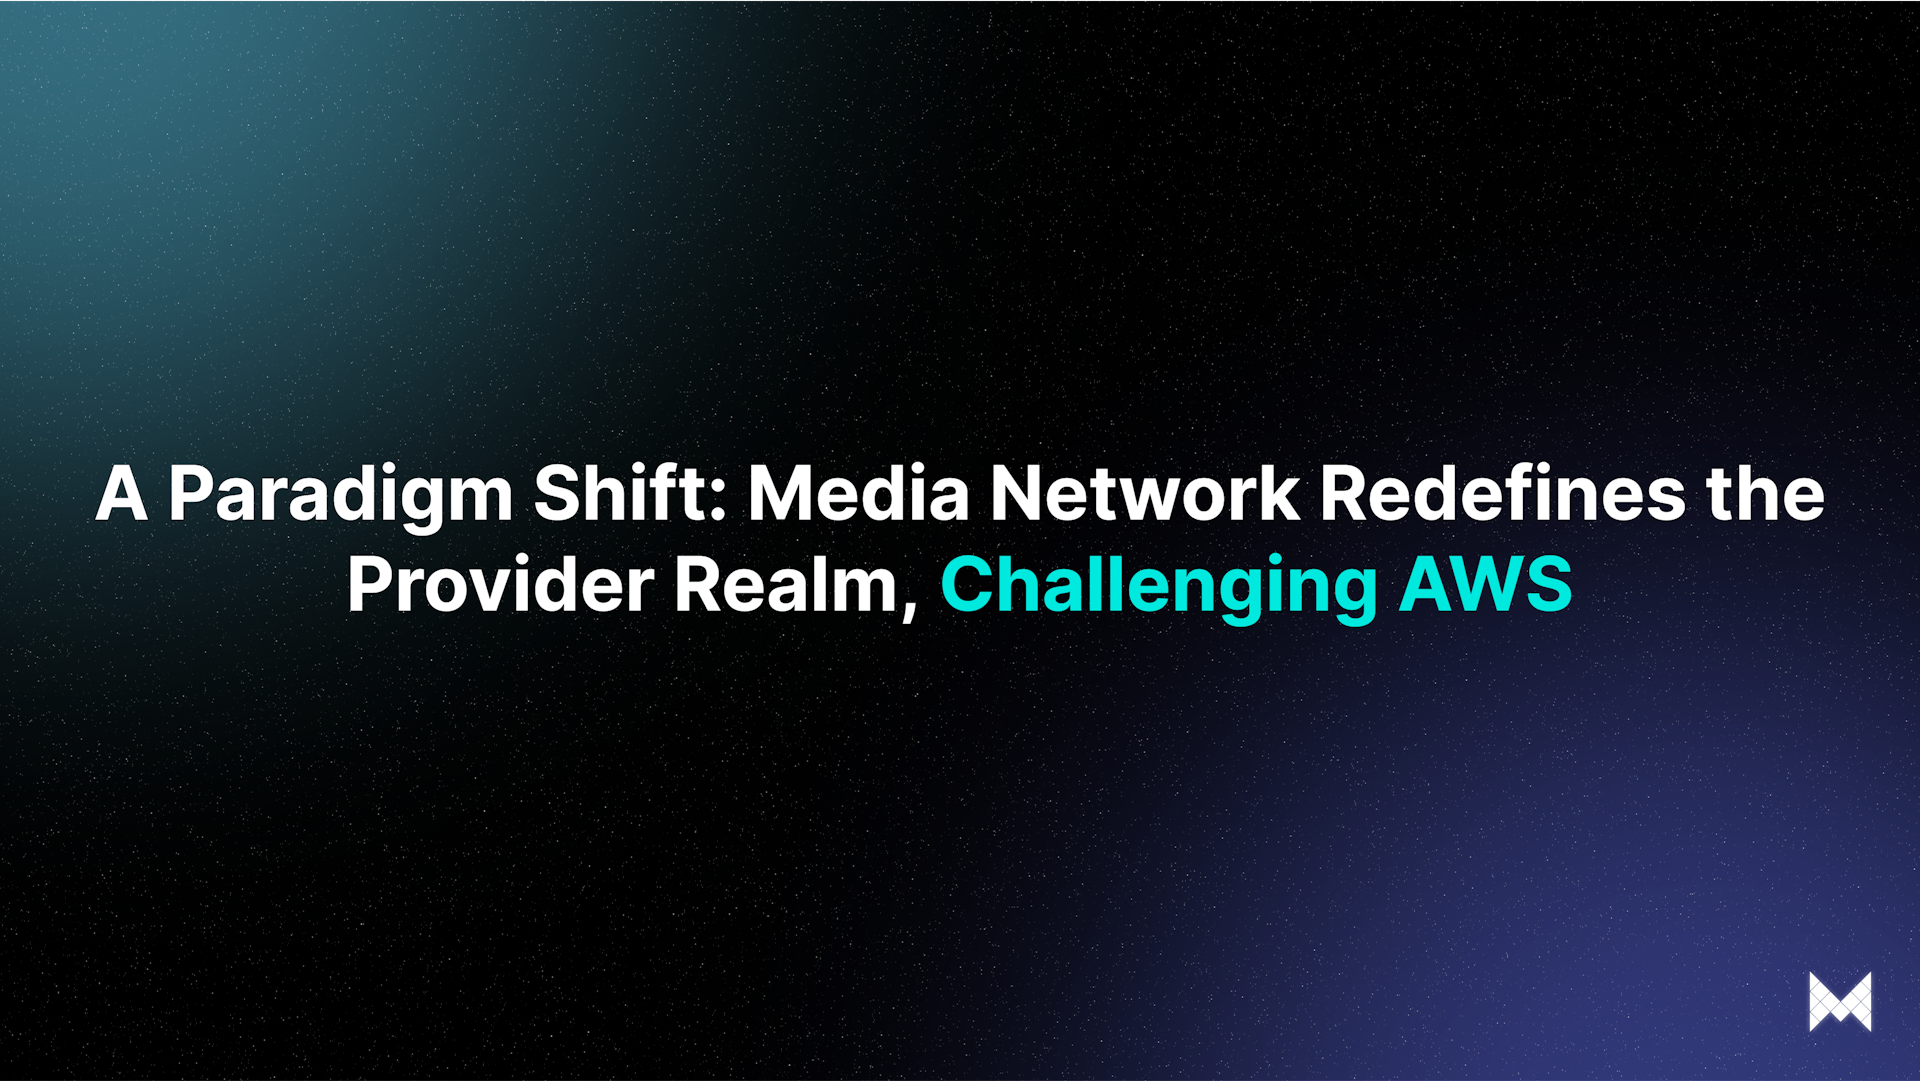 A Paradigm Shift: Media Network Redefines the Provider Realm, Challenging AWS